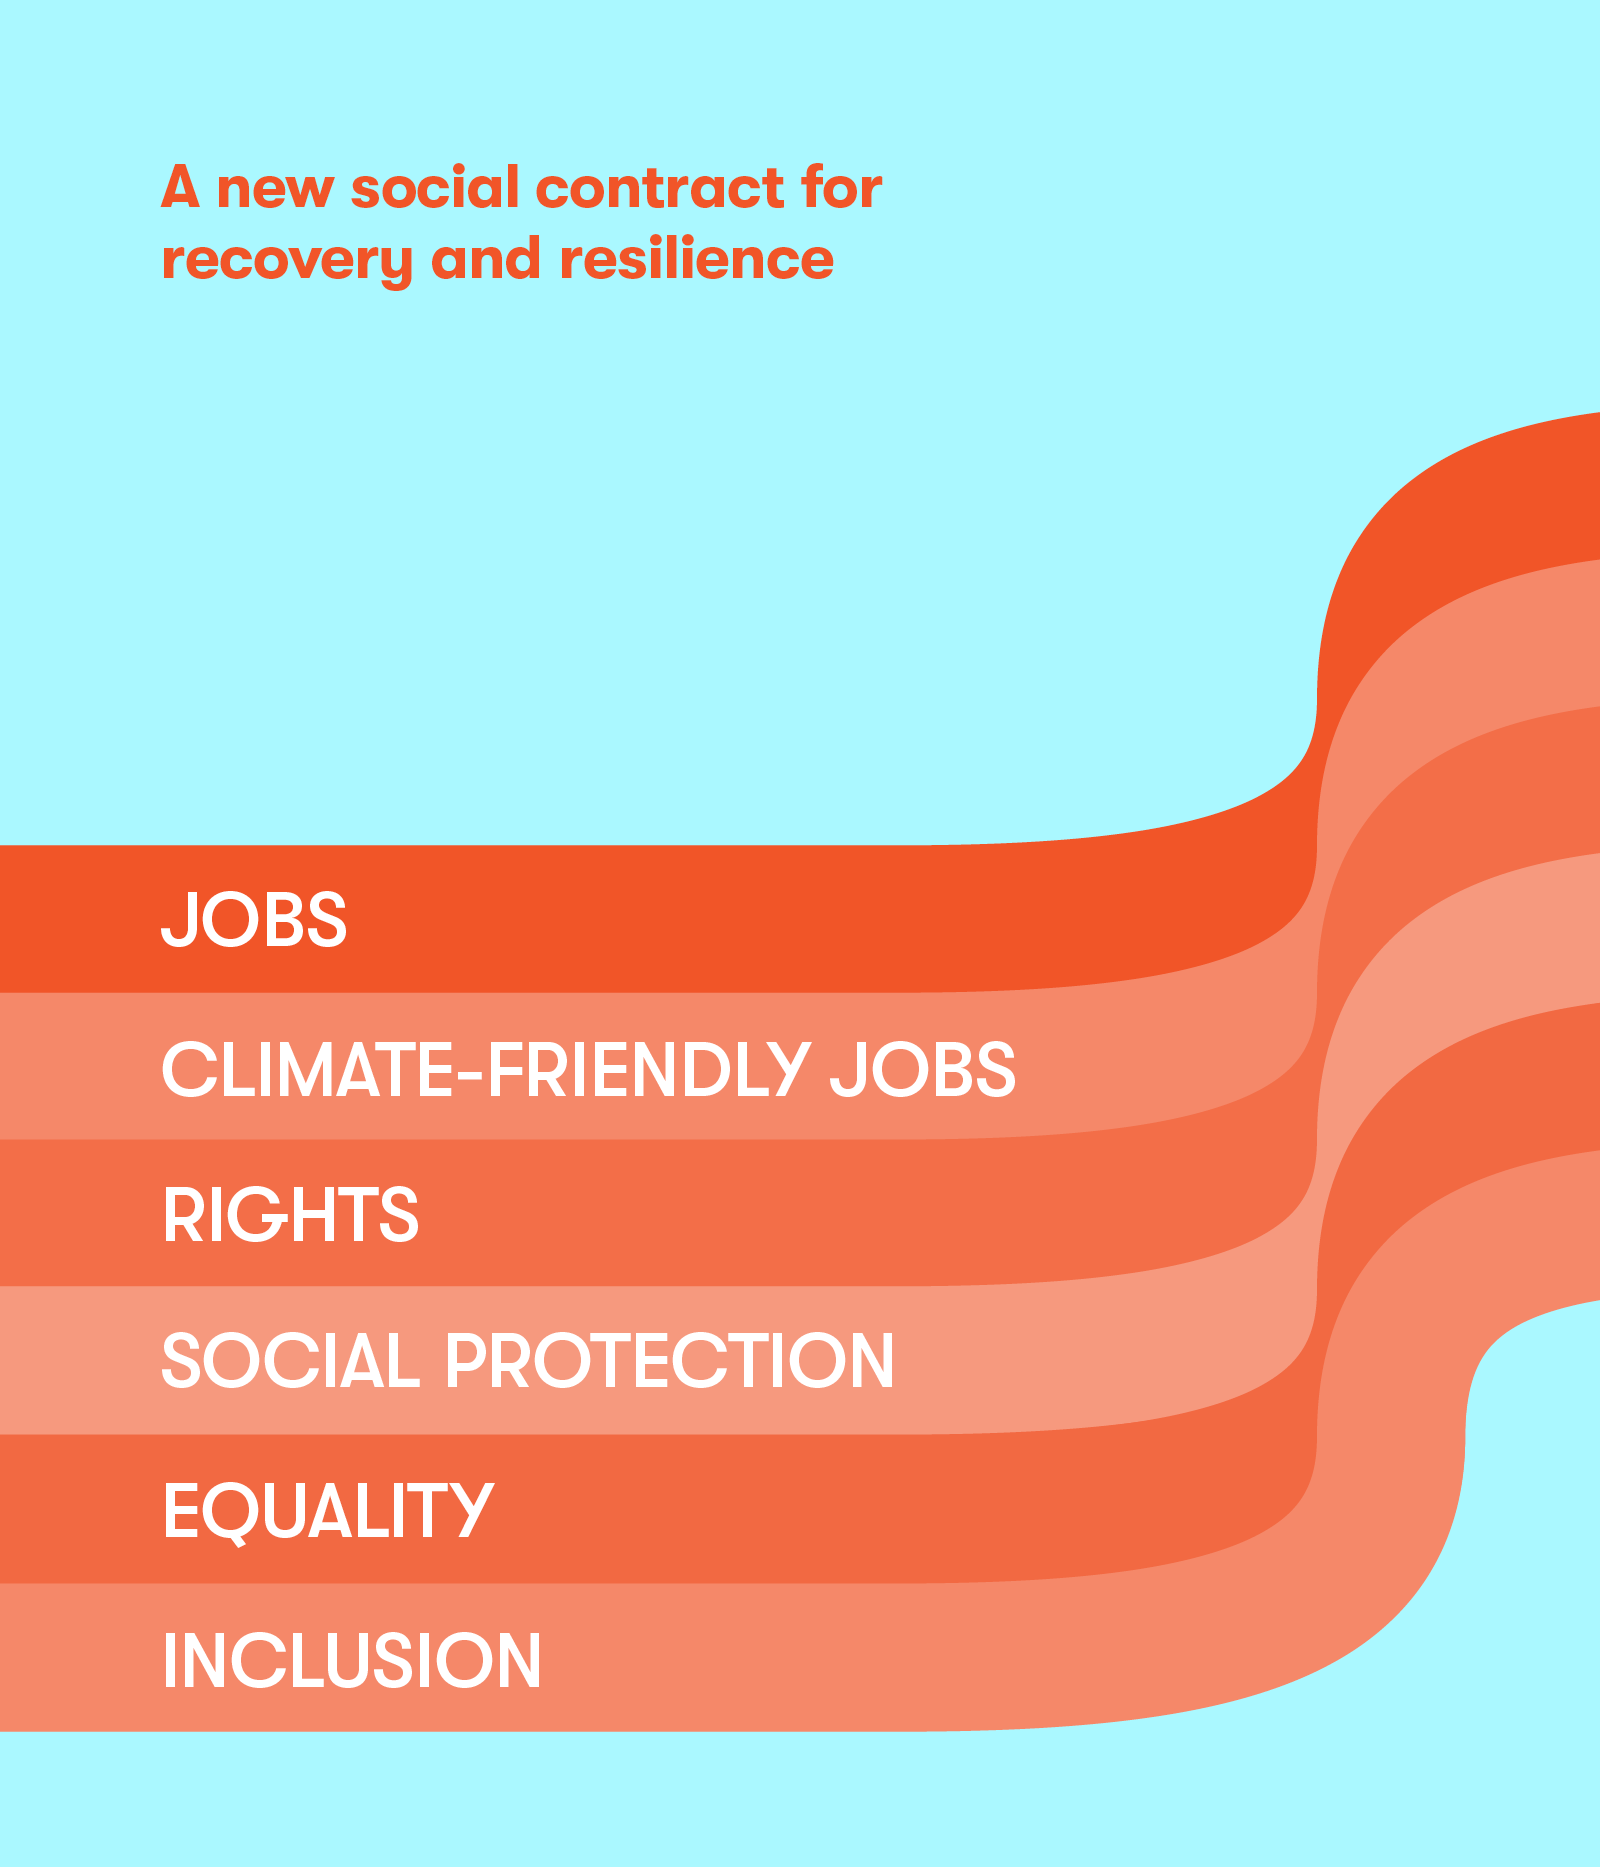 Website_ITUC_NewSocialContract_Images4.png